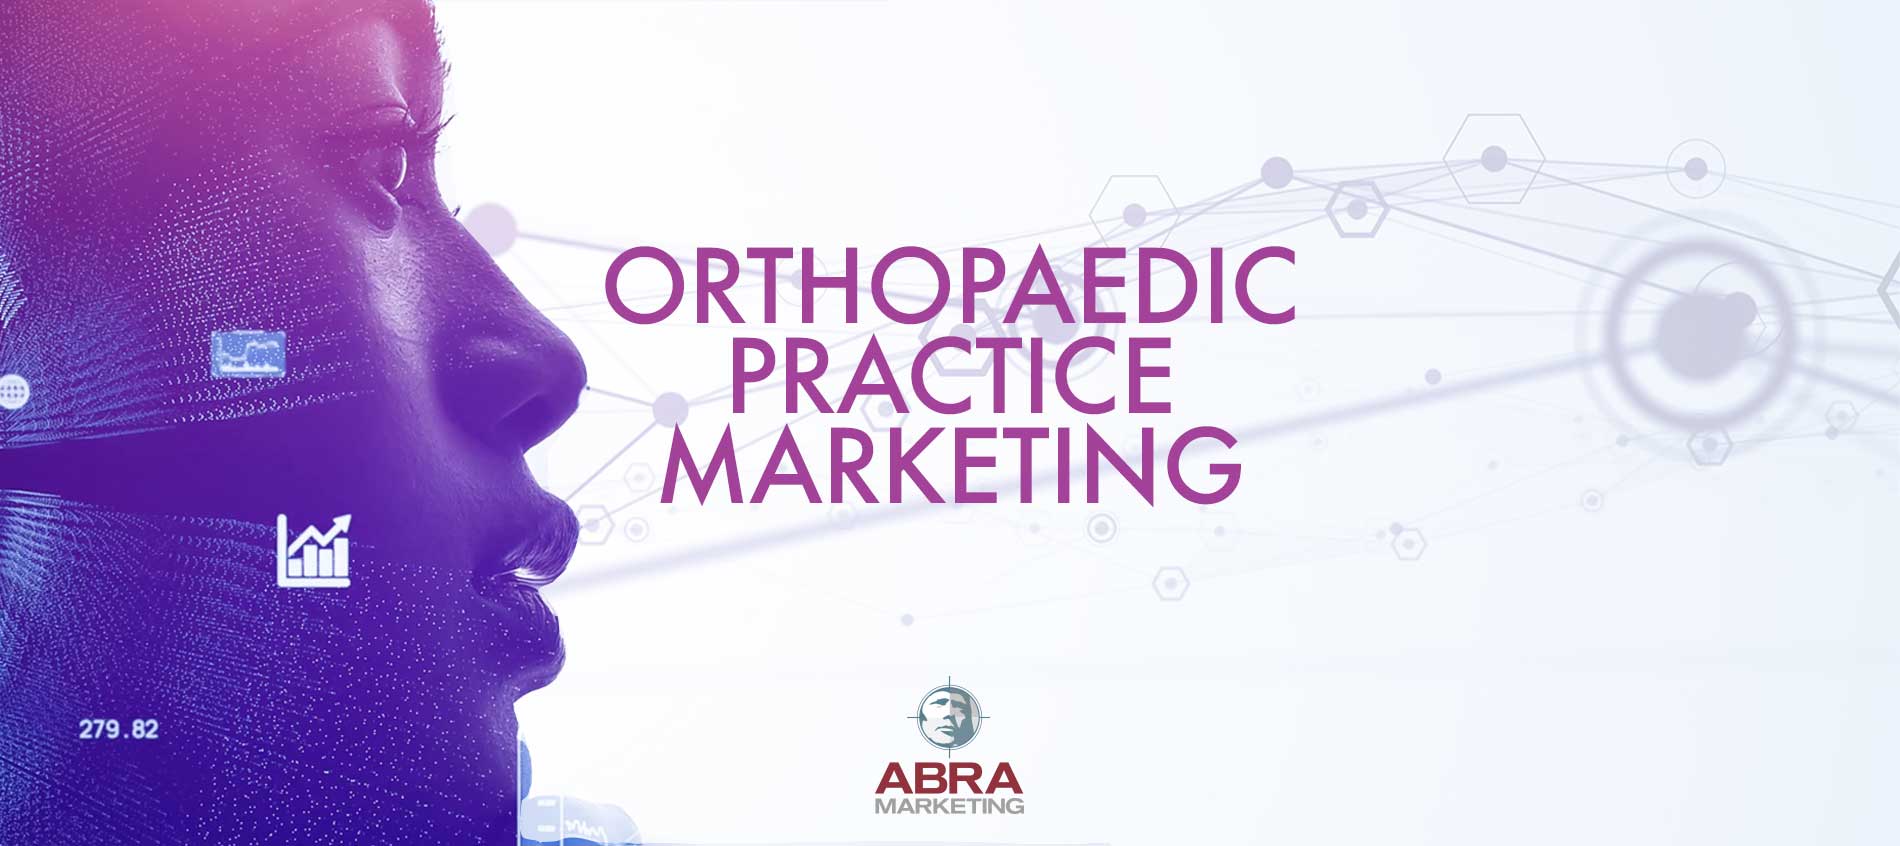 Orthopedic practice marketing. Stylized image of a woman's profile in a gradient of purple hues with the text Orthopedic Practice Marketing. Abra has provided marketing for orthopedic practices since 2001.